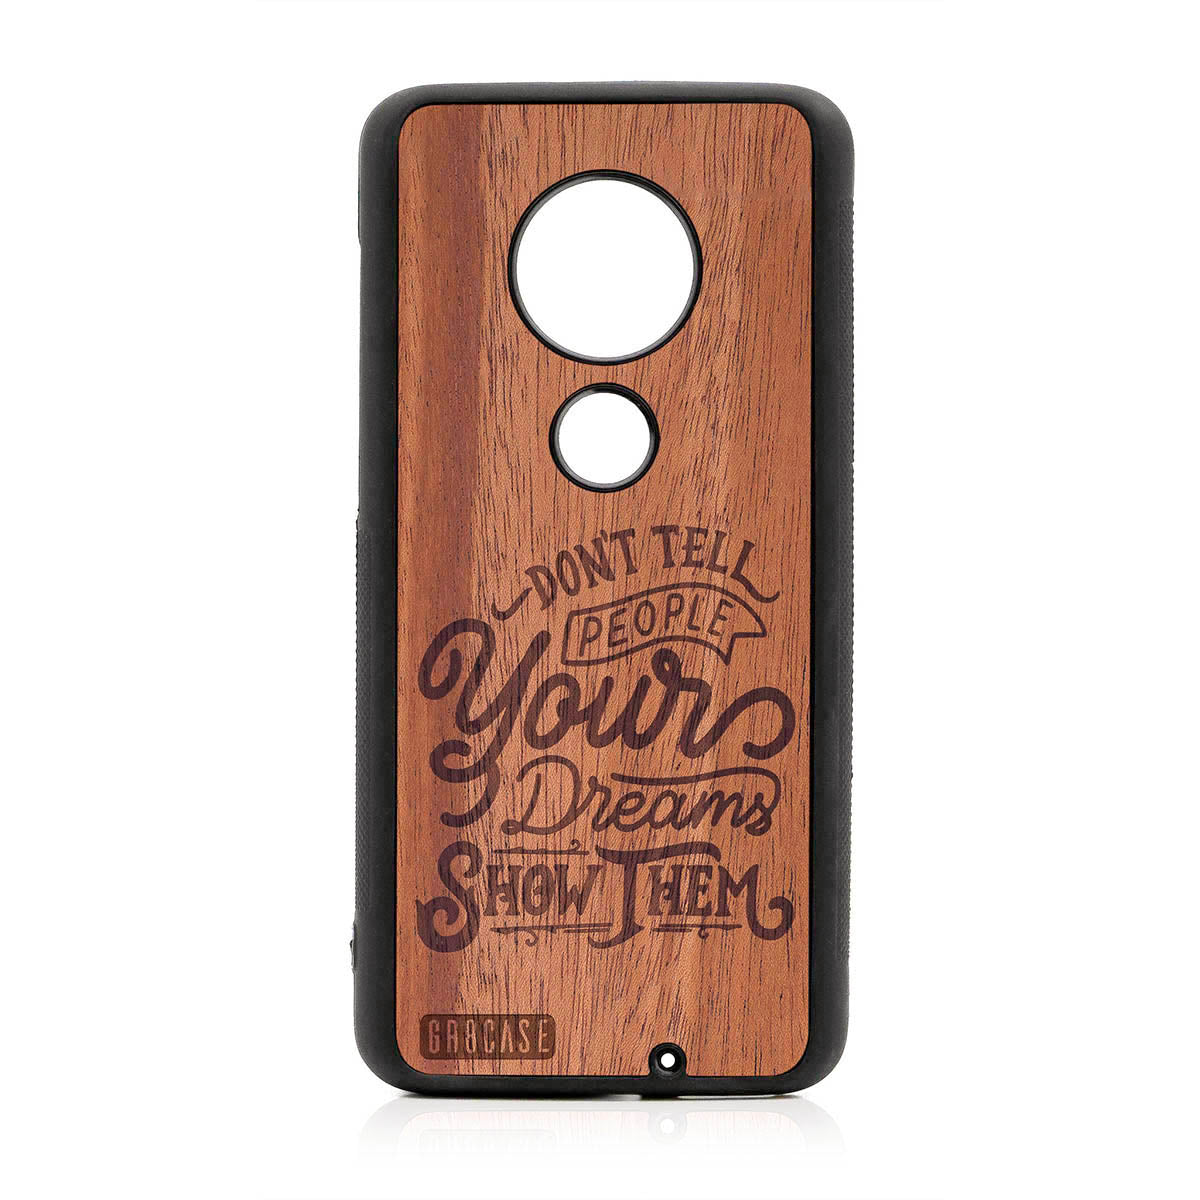 Don't Tell People Your Dreams Show Them Design Wood Case For Moto G7 Plus by GR8CASE